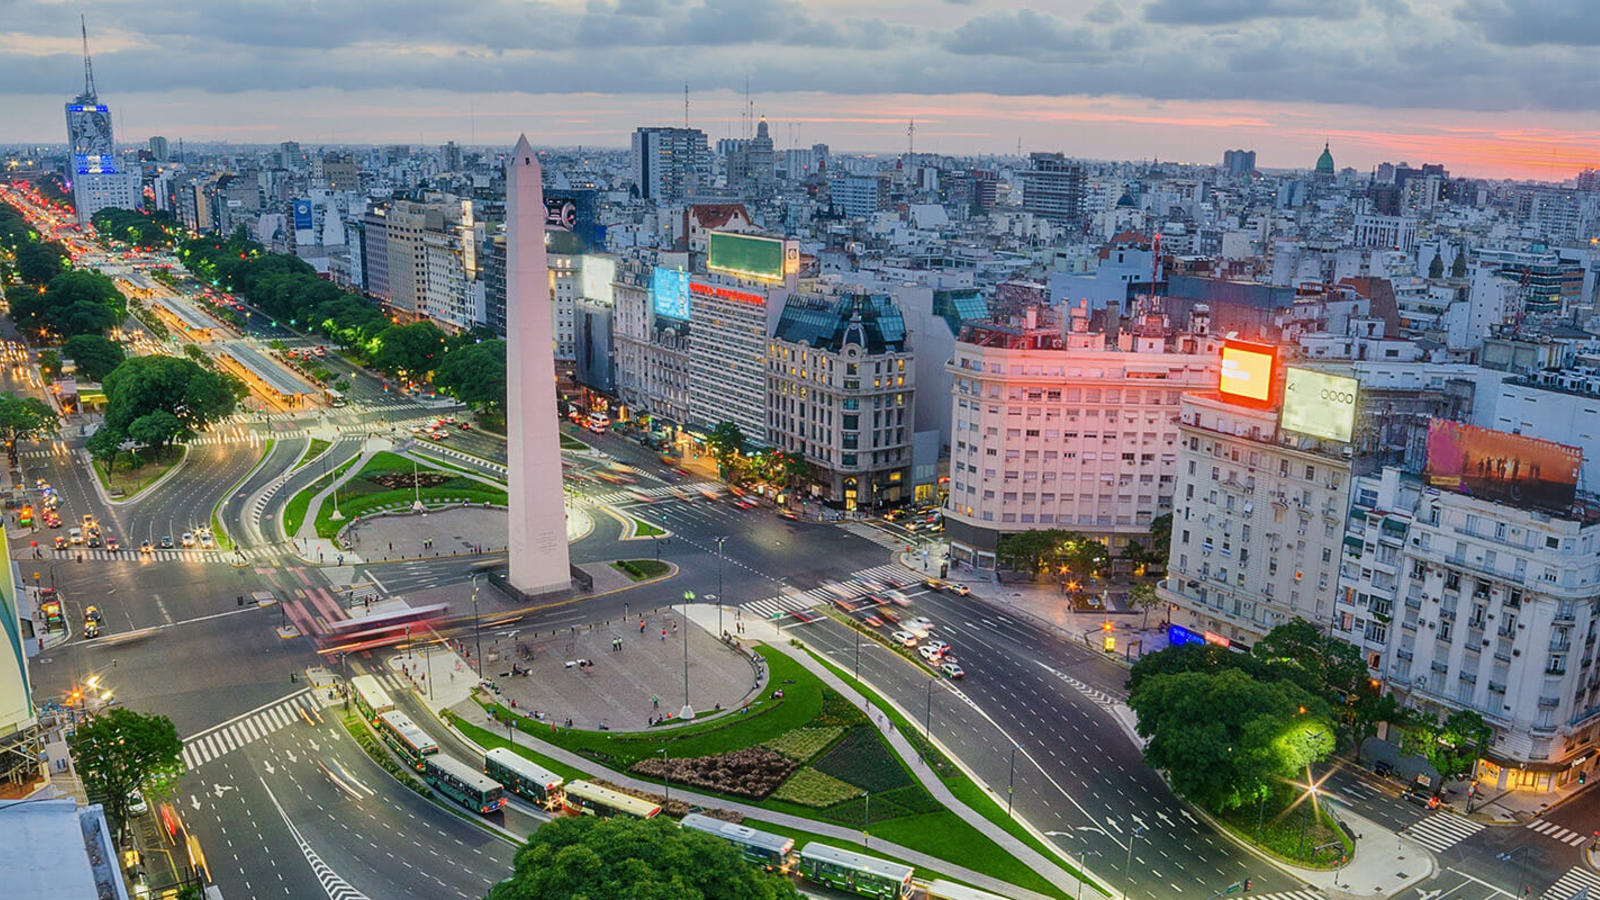 Skyline of Buenos Aires, Argentina